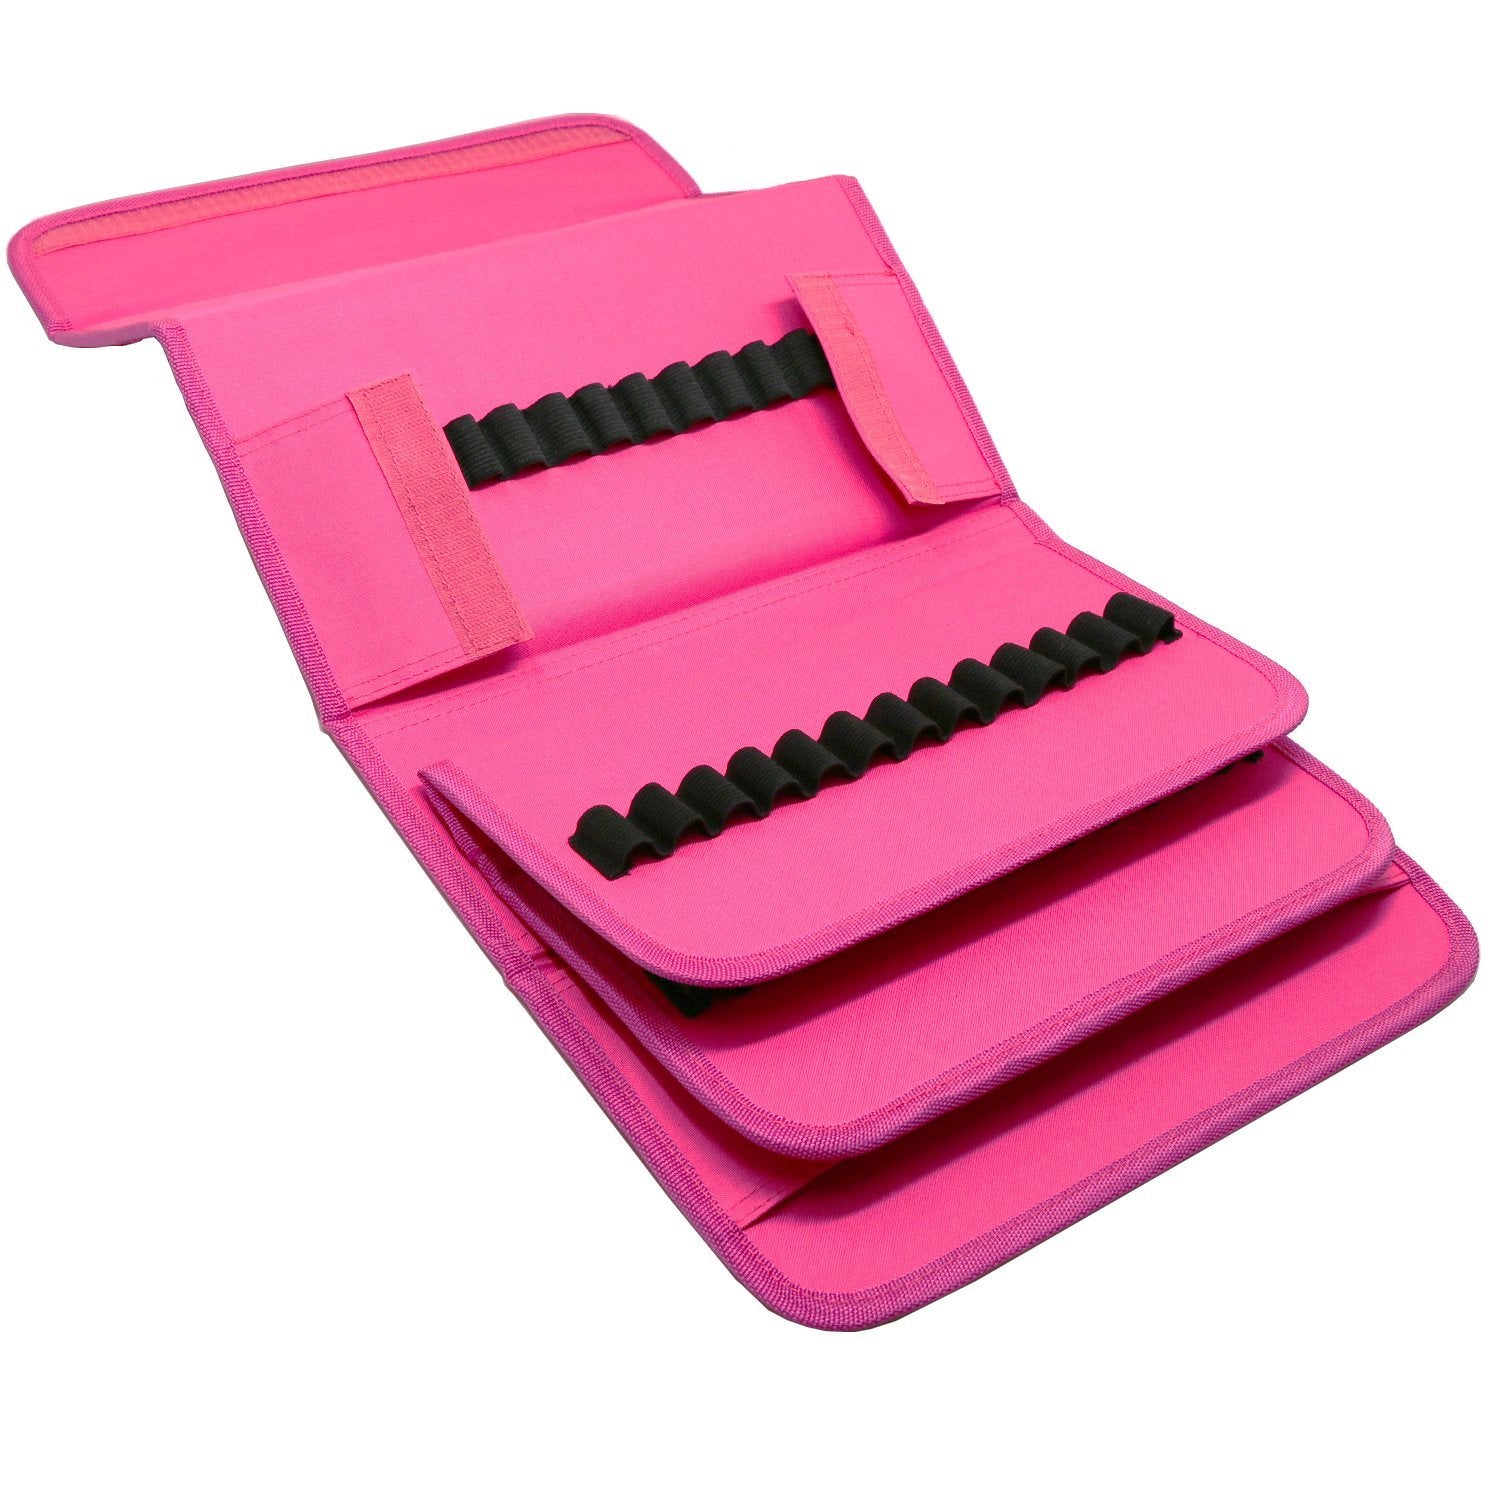 Markers Case Oxford Organizer Holder with 80 Slots